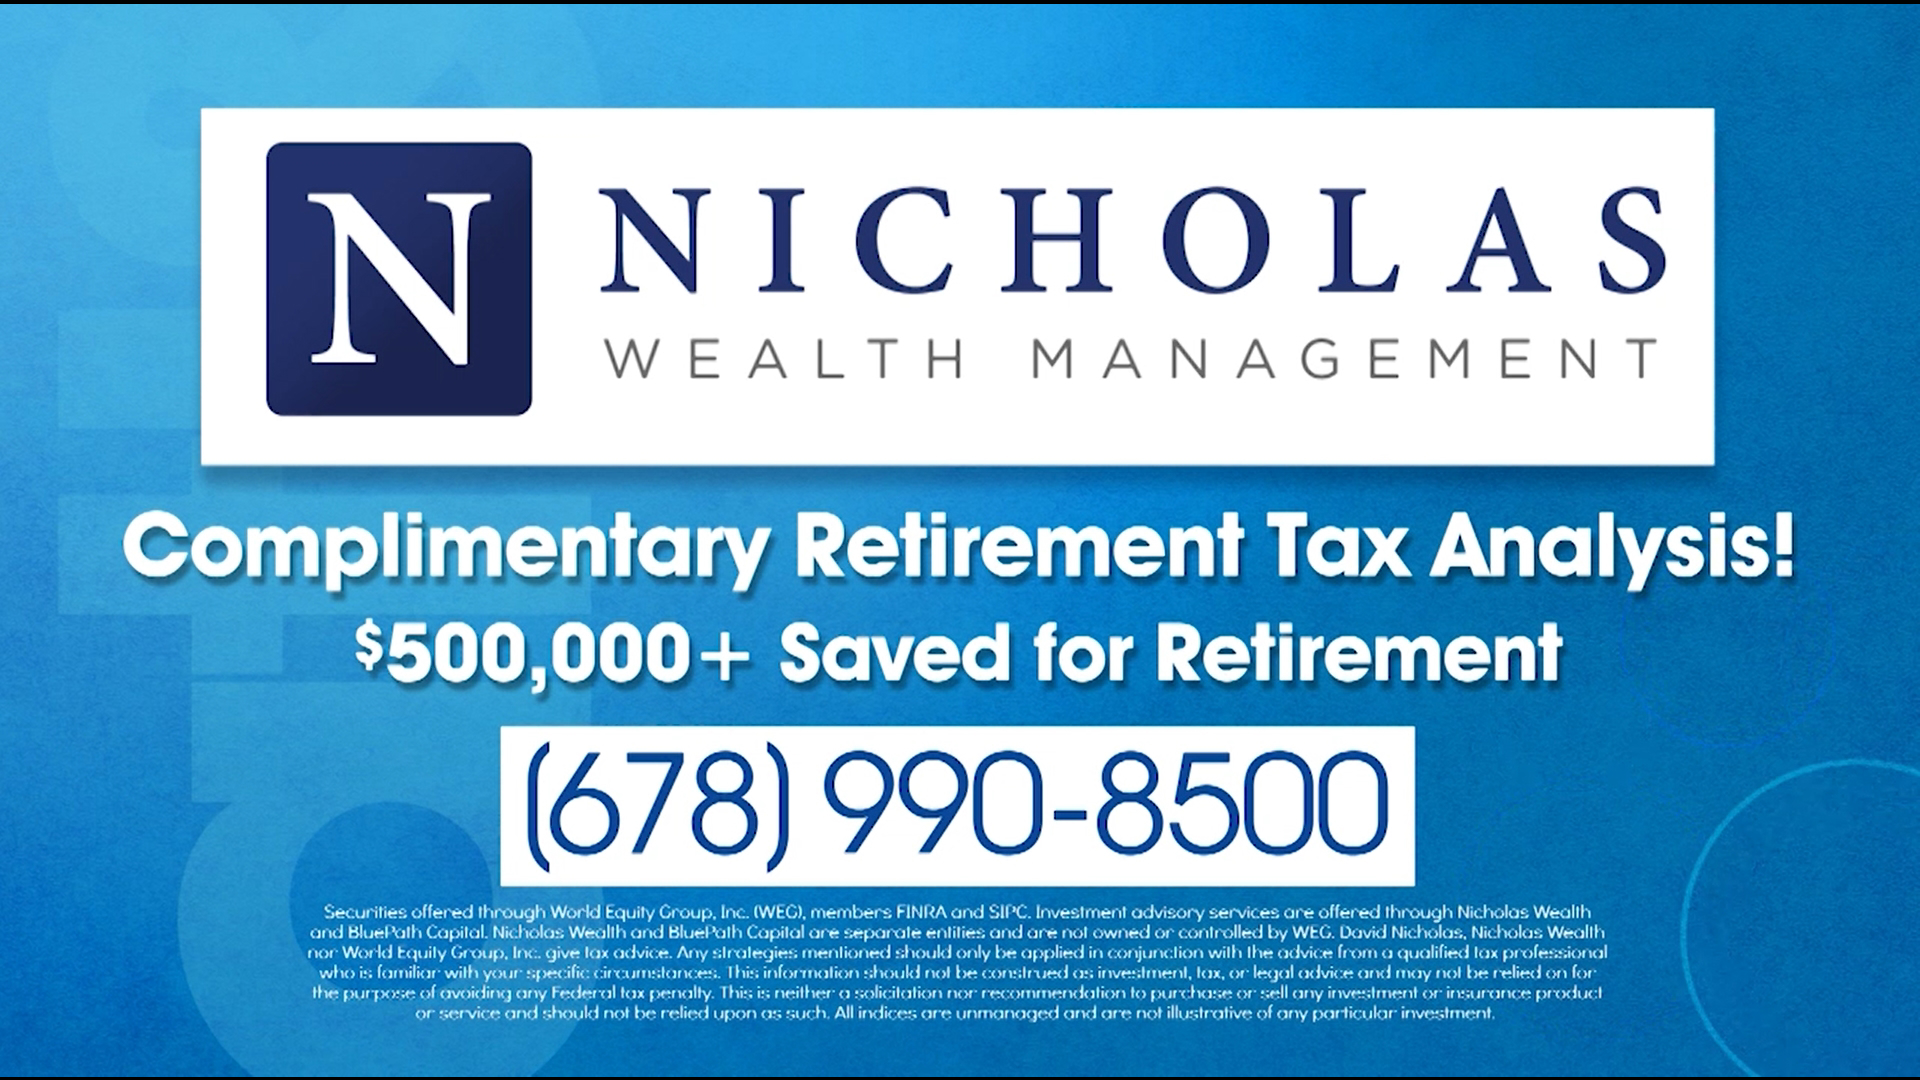 Get the most out of your retirement savings with the tax experts at Nicholas Wealth Management.